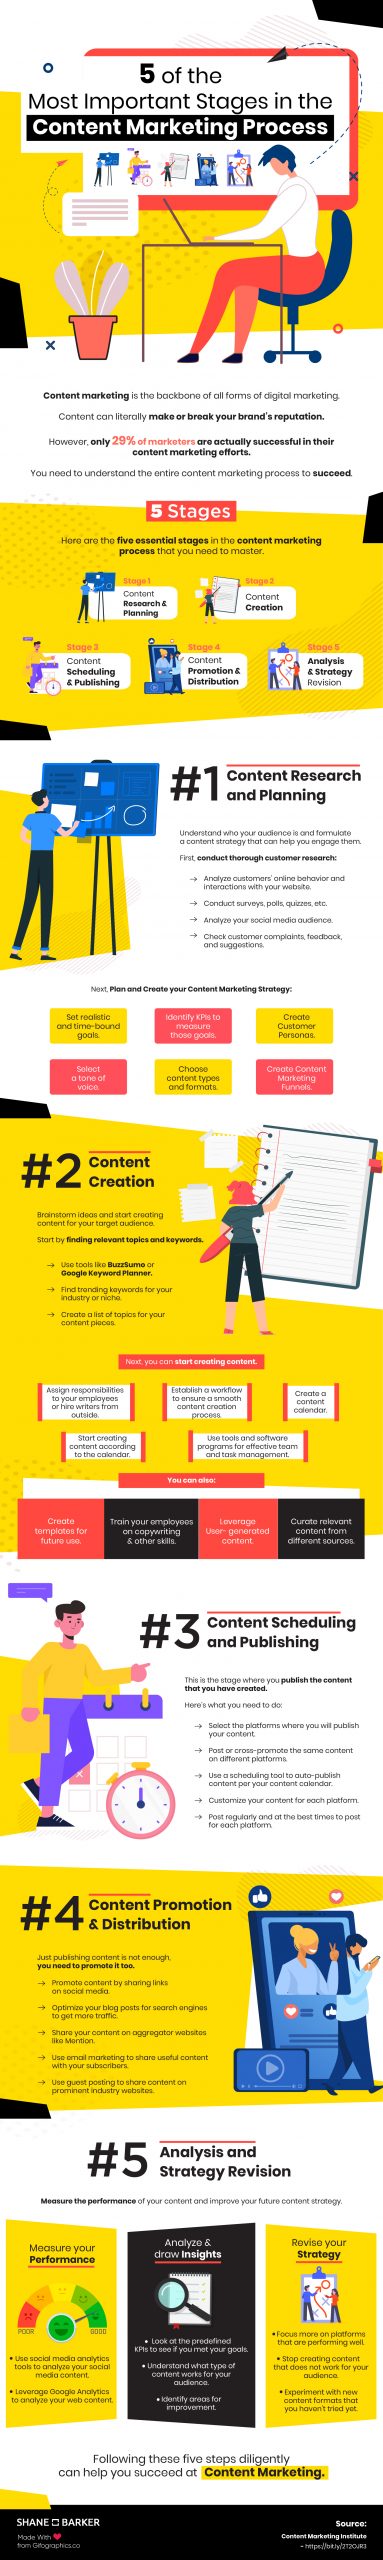 Infographic with the most important stages of the content marketing process.